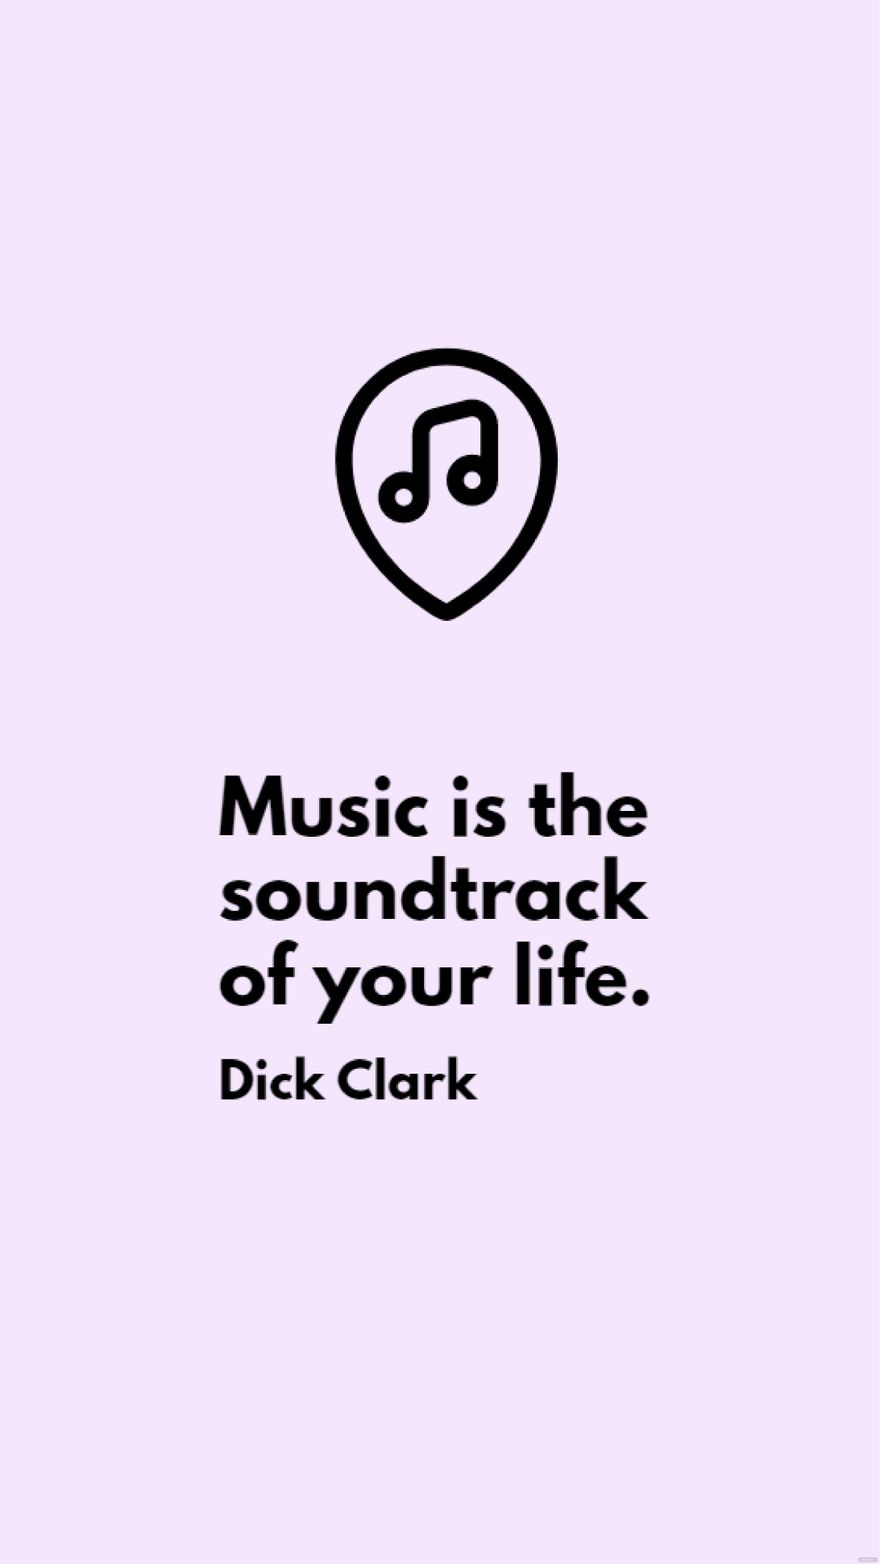 Free Dick Clark - Music is the soundtrack of your life. in JPG